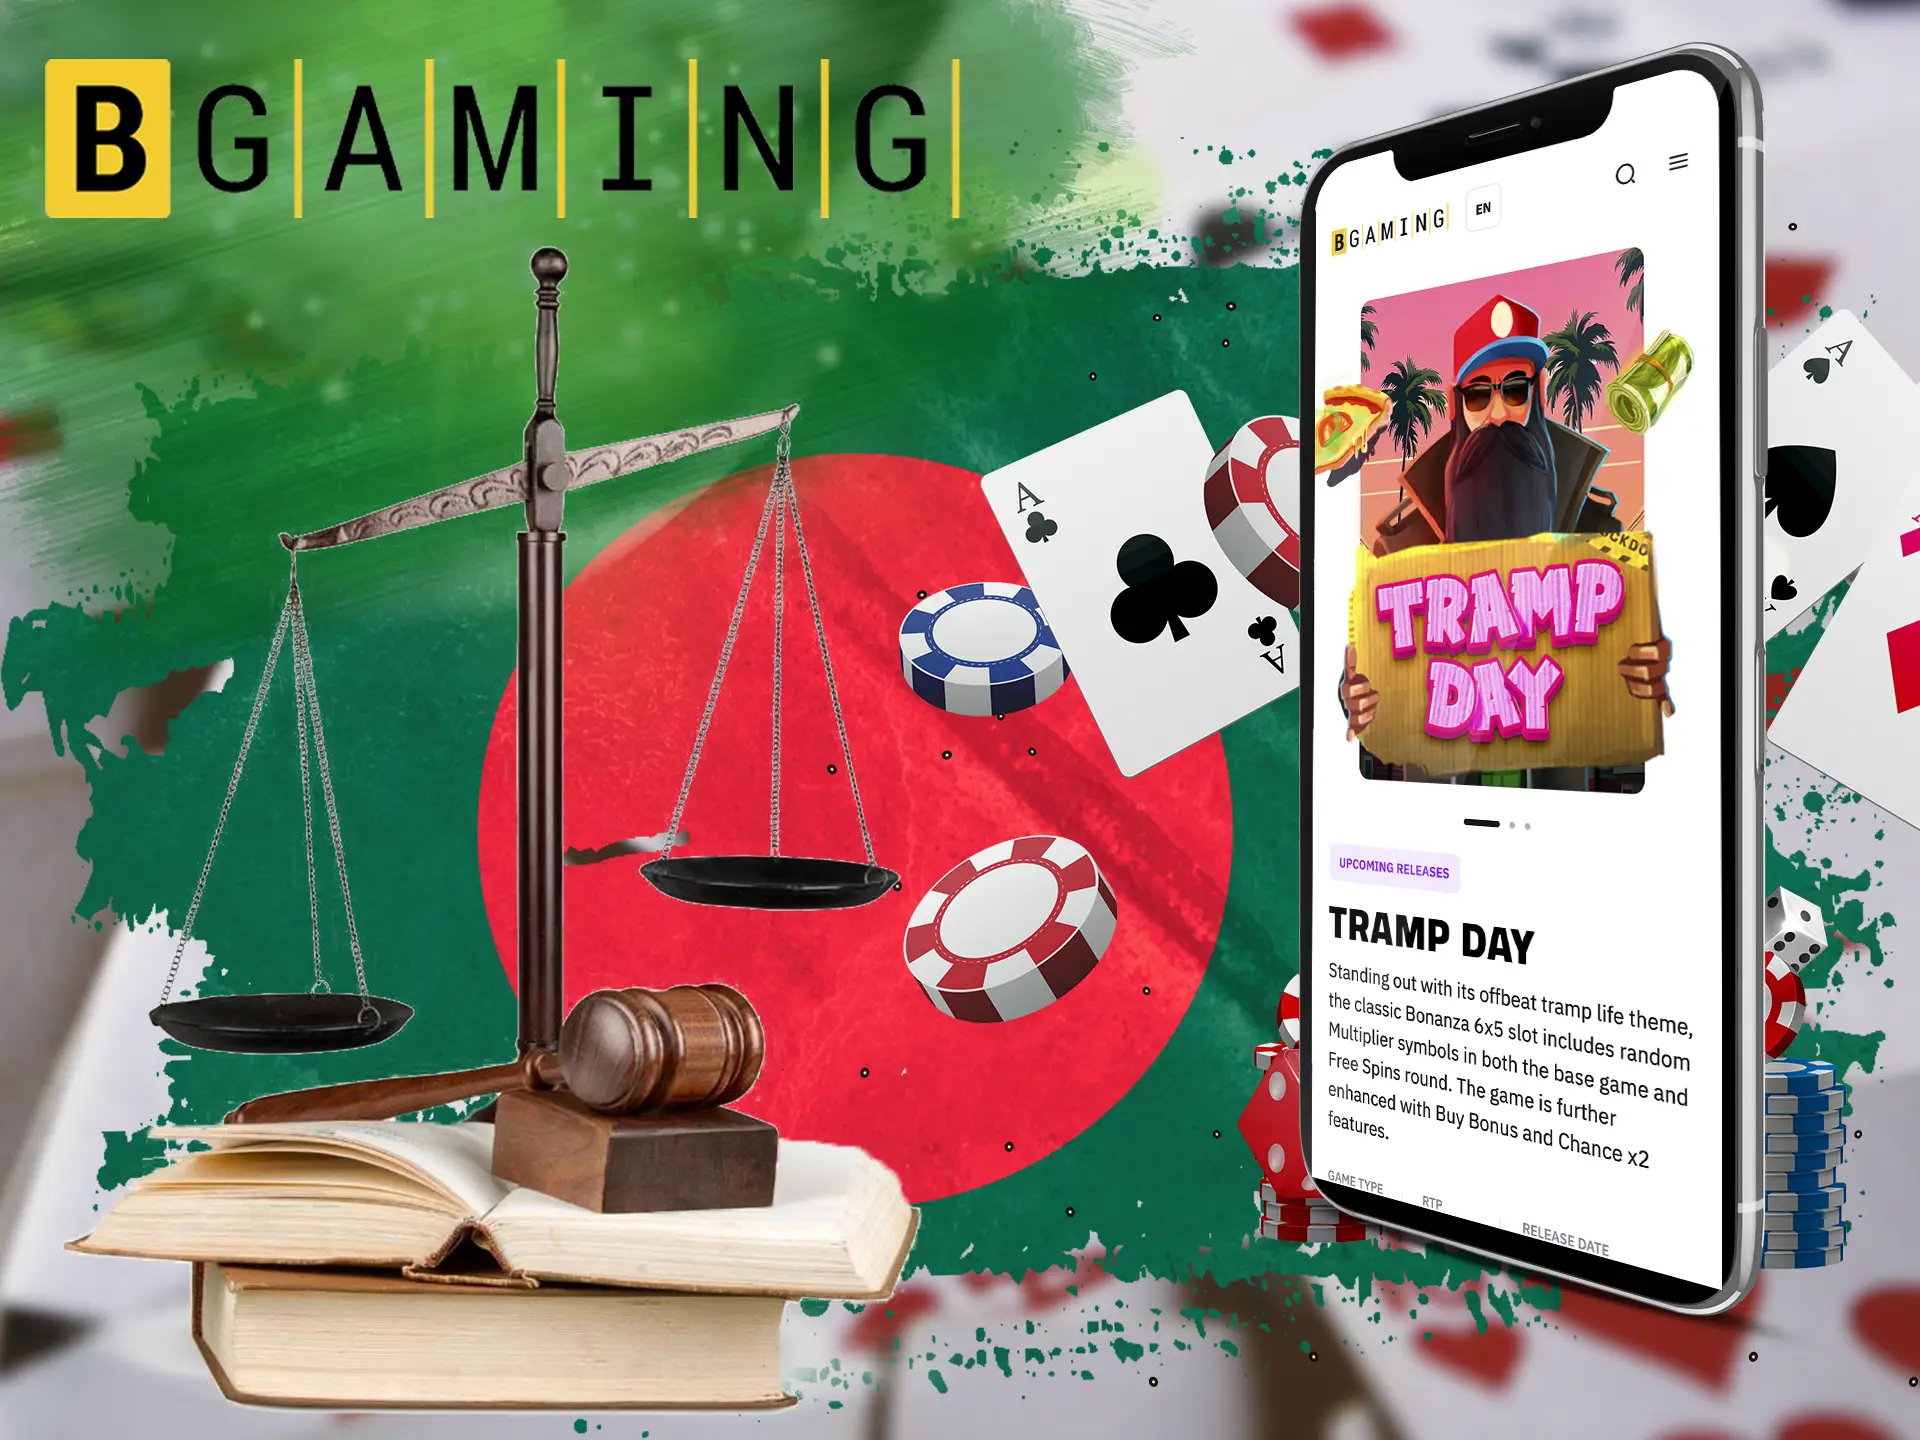 Bgaming conducts legal business in Bangladesh, which is confirmed by a special gambling license issued by Romania.